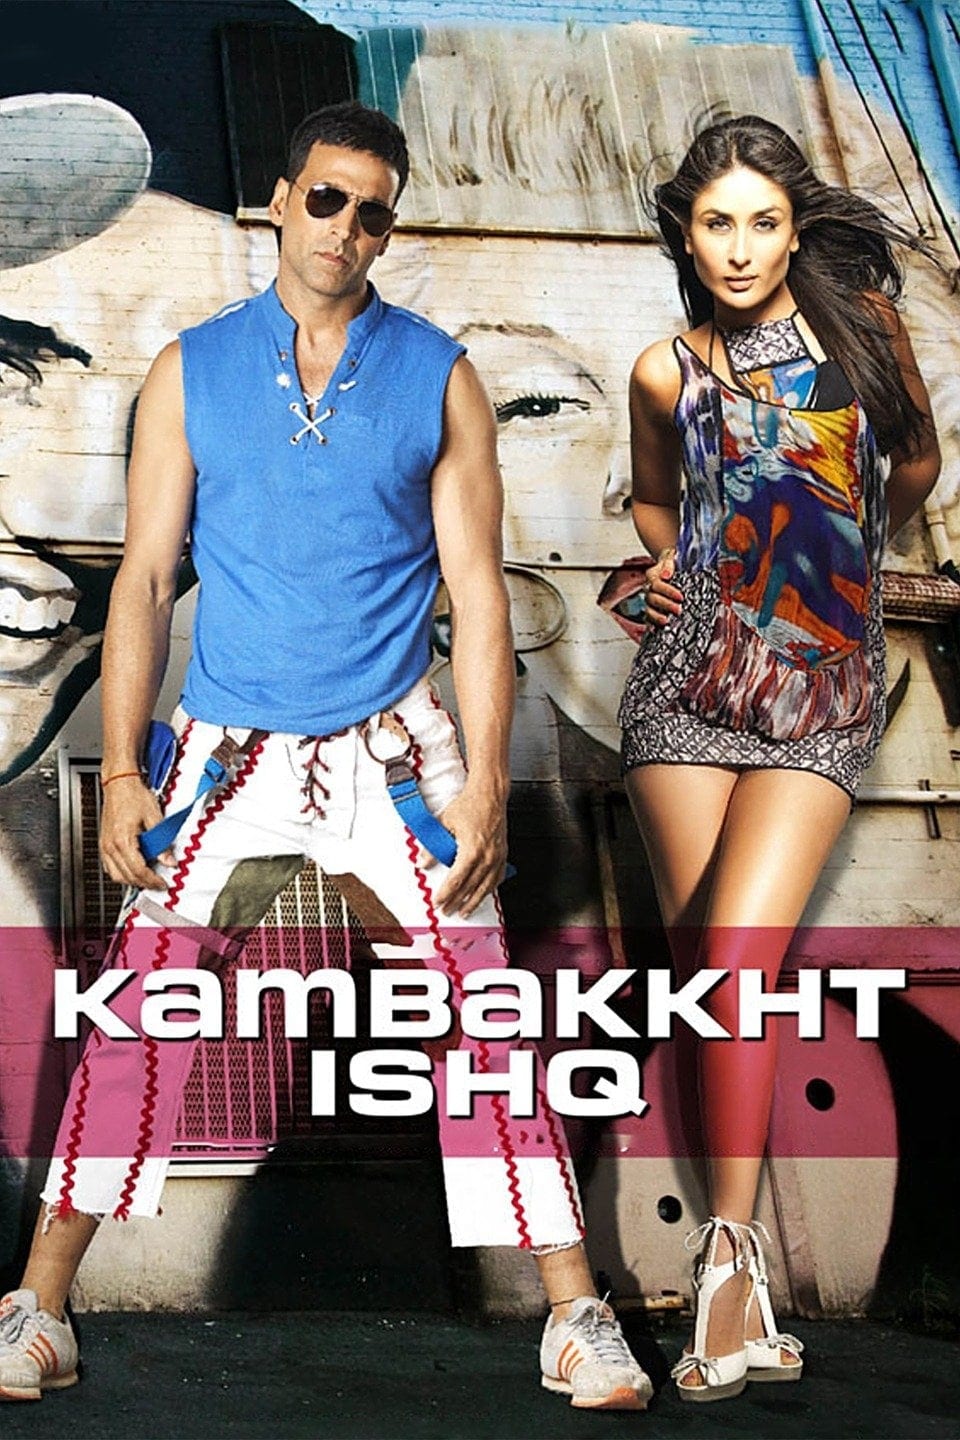 Poster for the movie "Kambakkht Ishq"